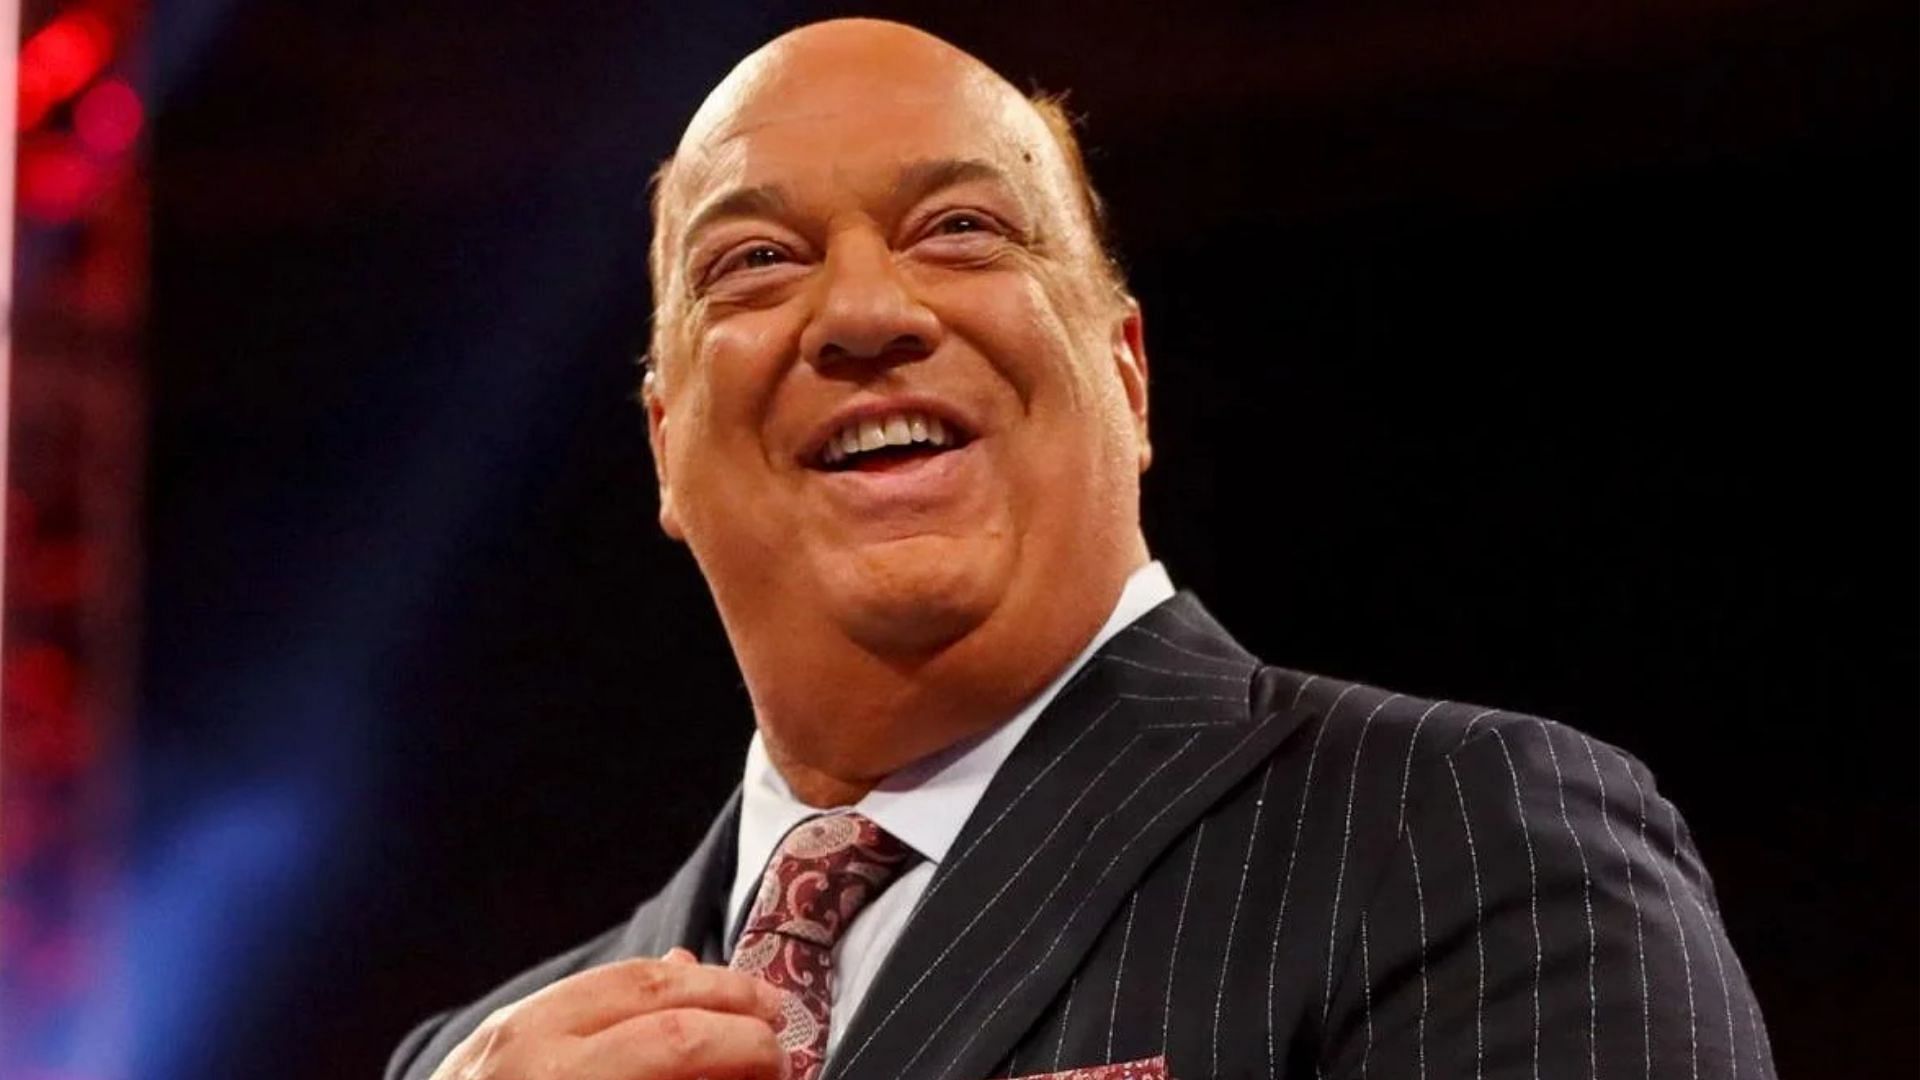 Was this incident an indication of Paul Heyman